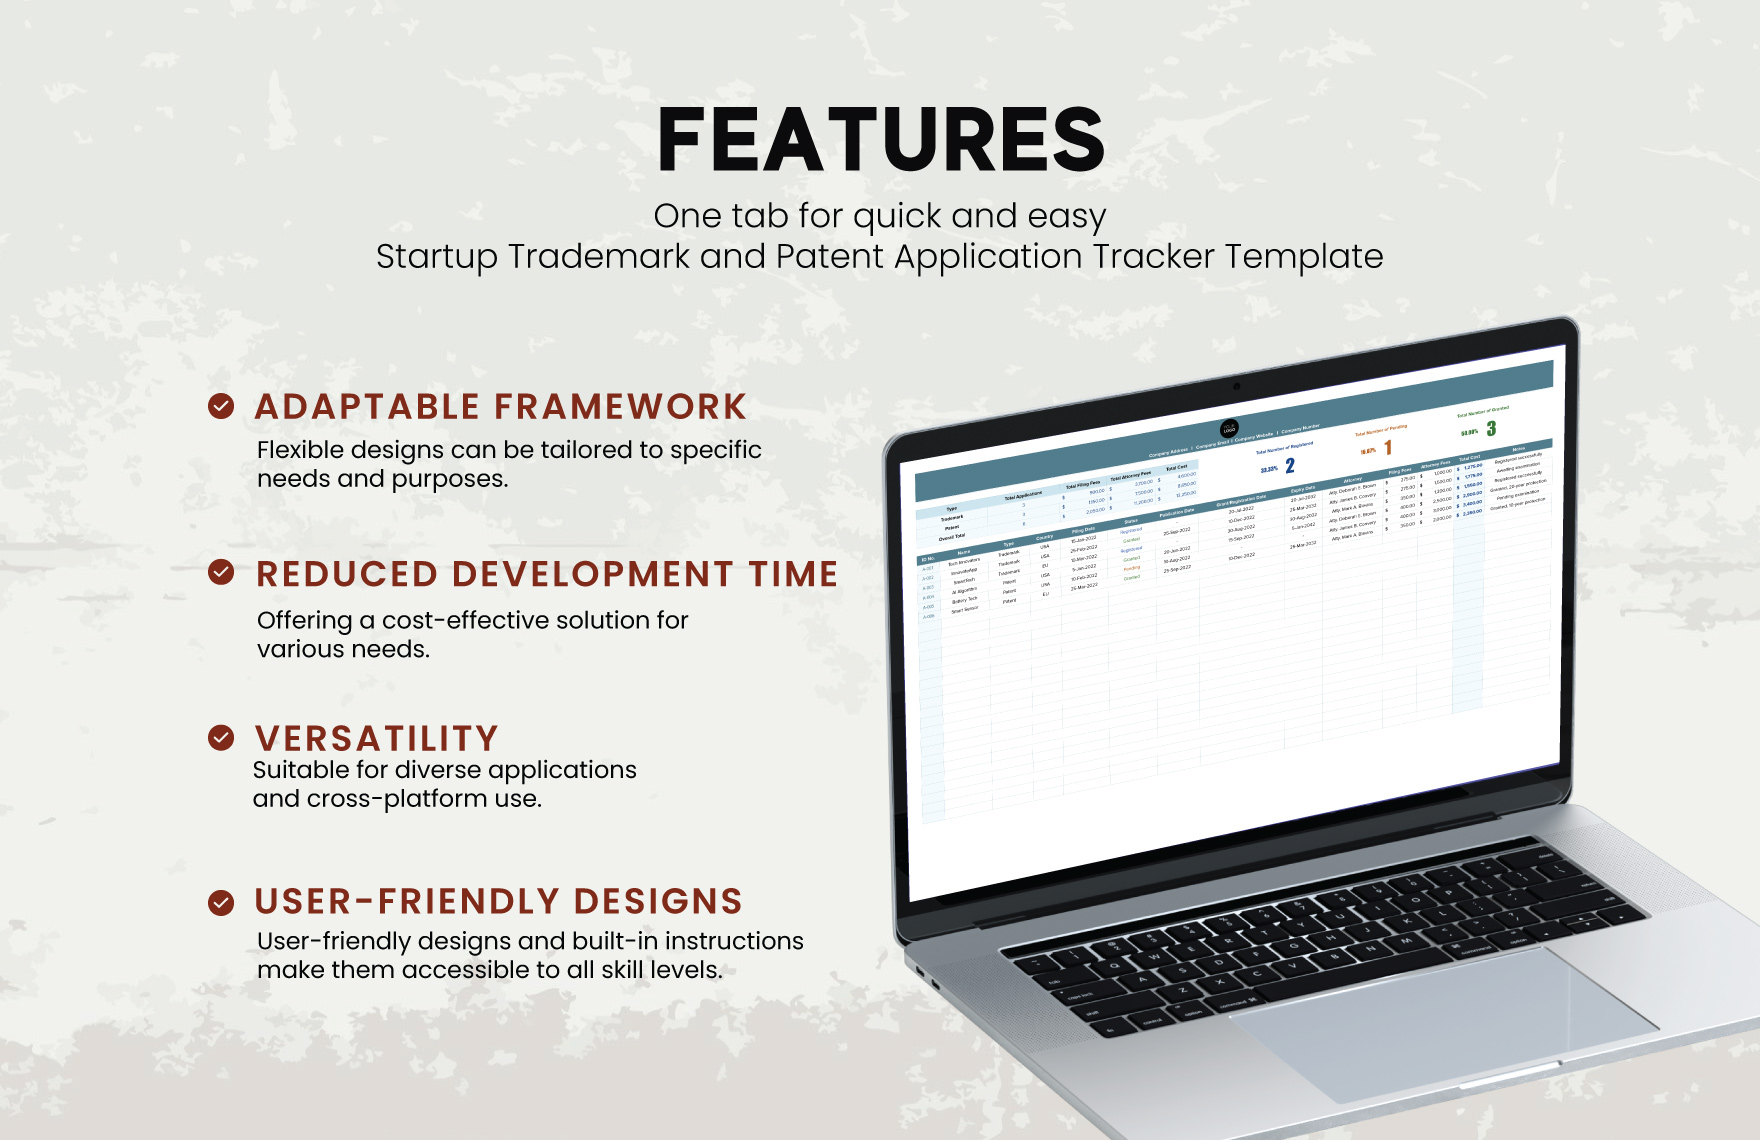 Startup Trademark and Patent Application Tracker Template